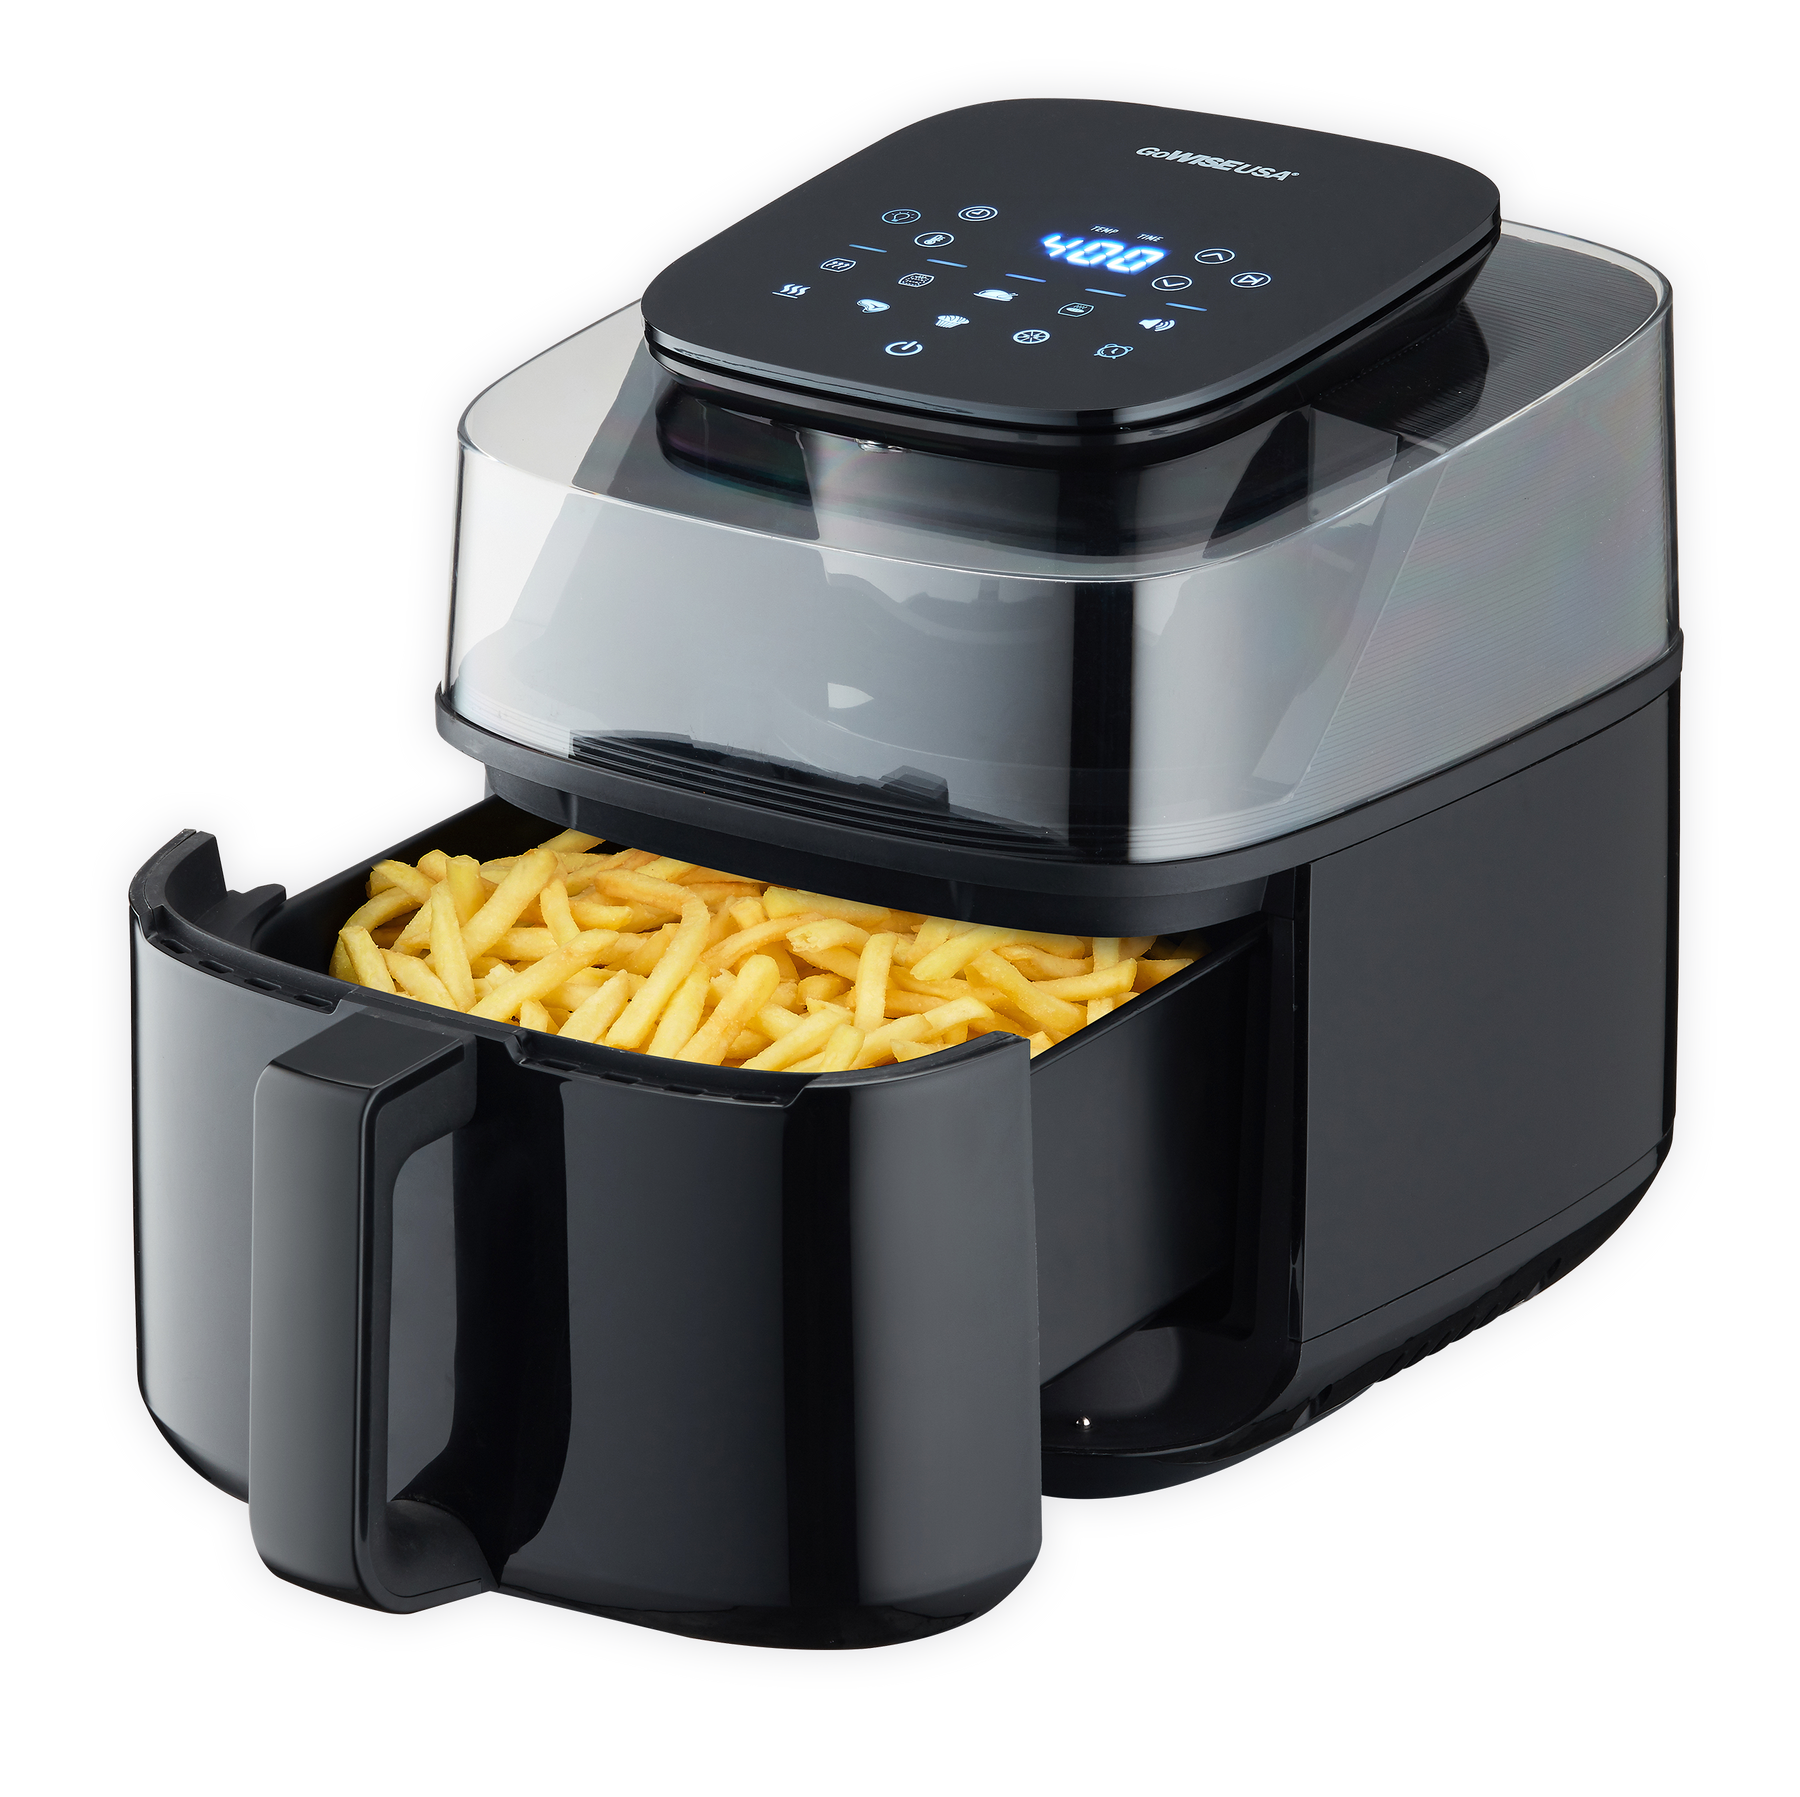 5.5 Quart Air Fryer with 180° Viewing Window